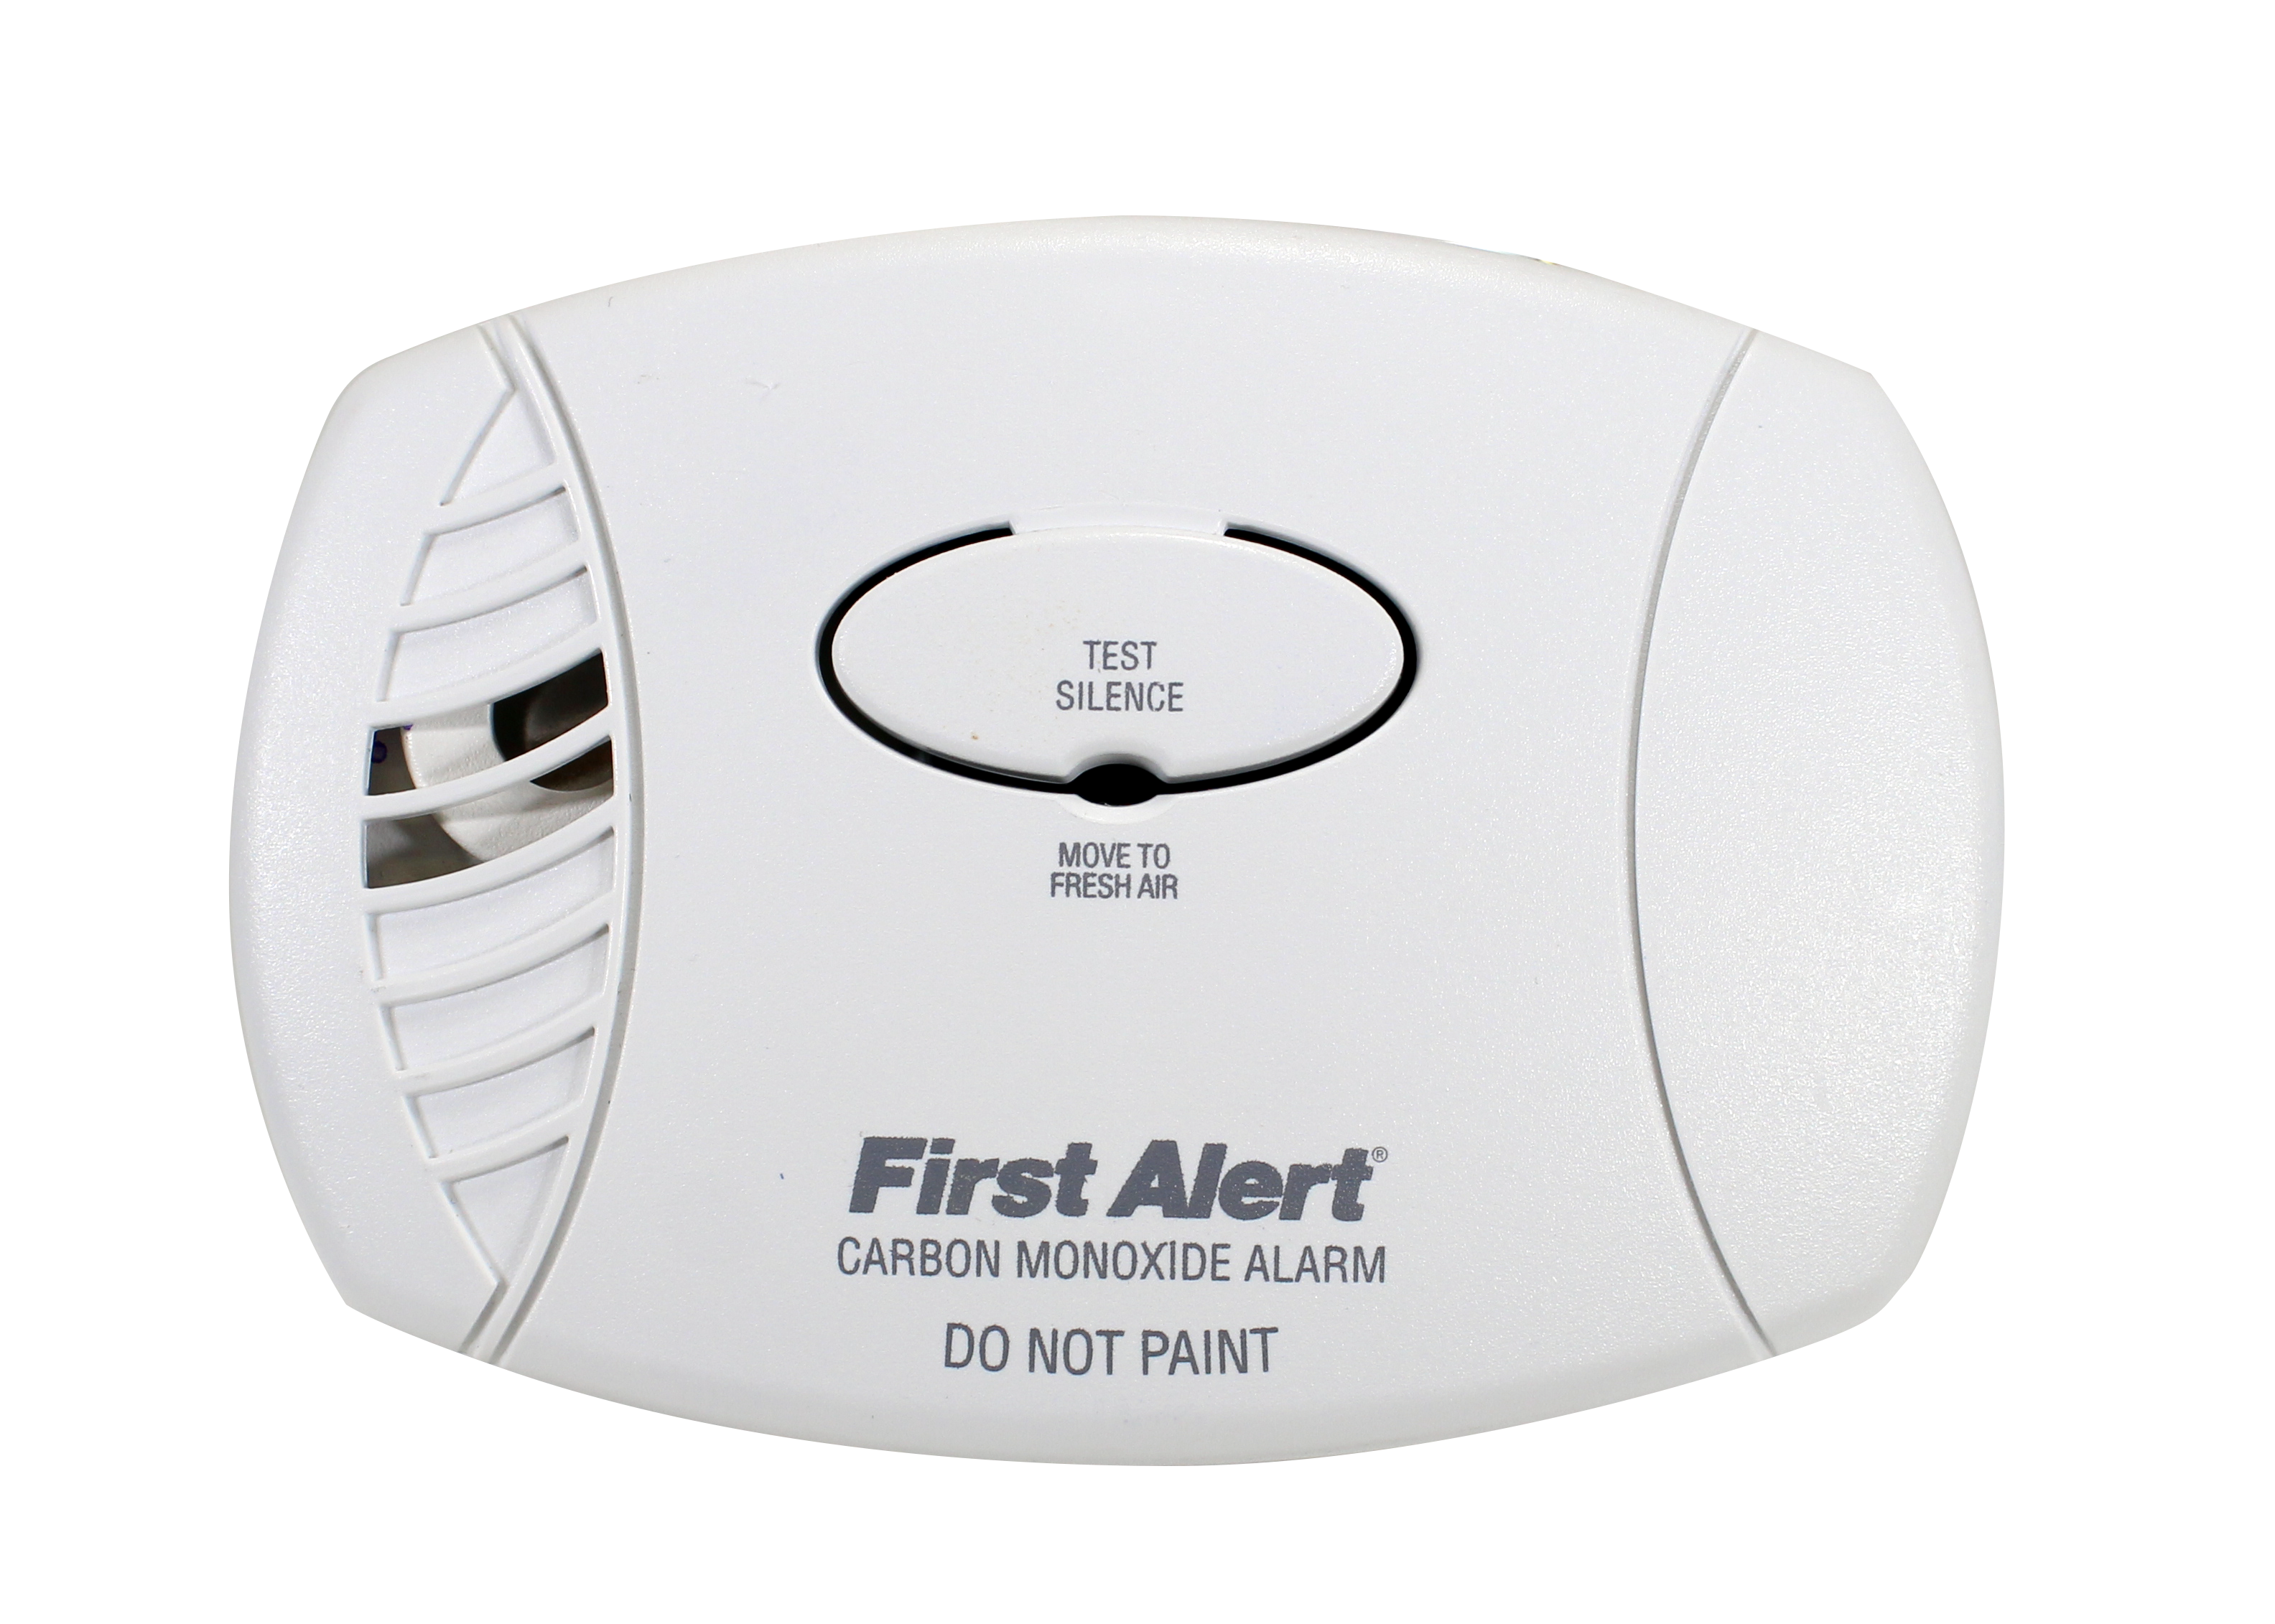 Plug-in carbon monoxide alarm with 9V battery backup meets most state and local codes for carbon monoxide alarms.